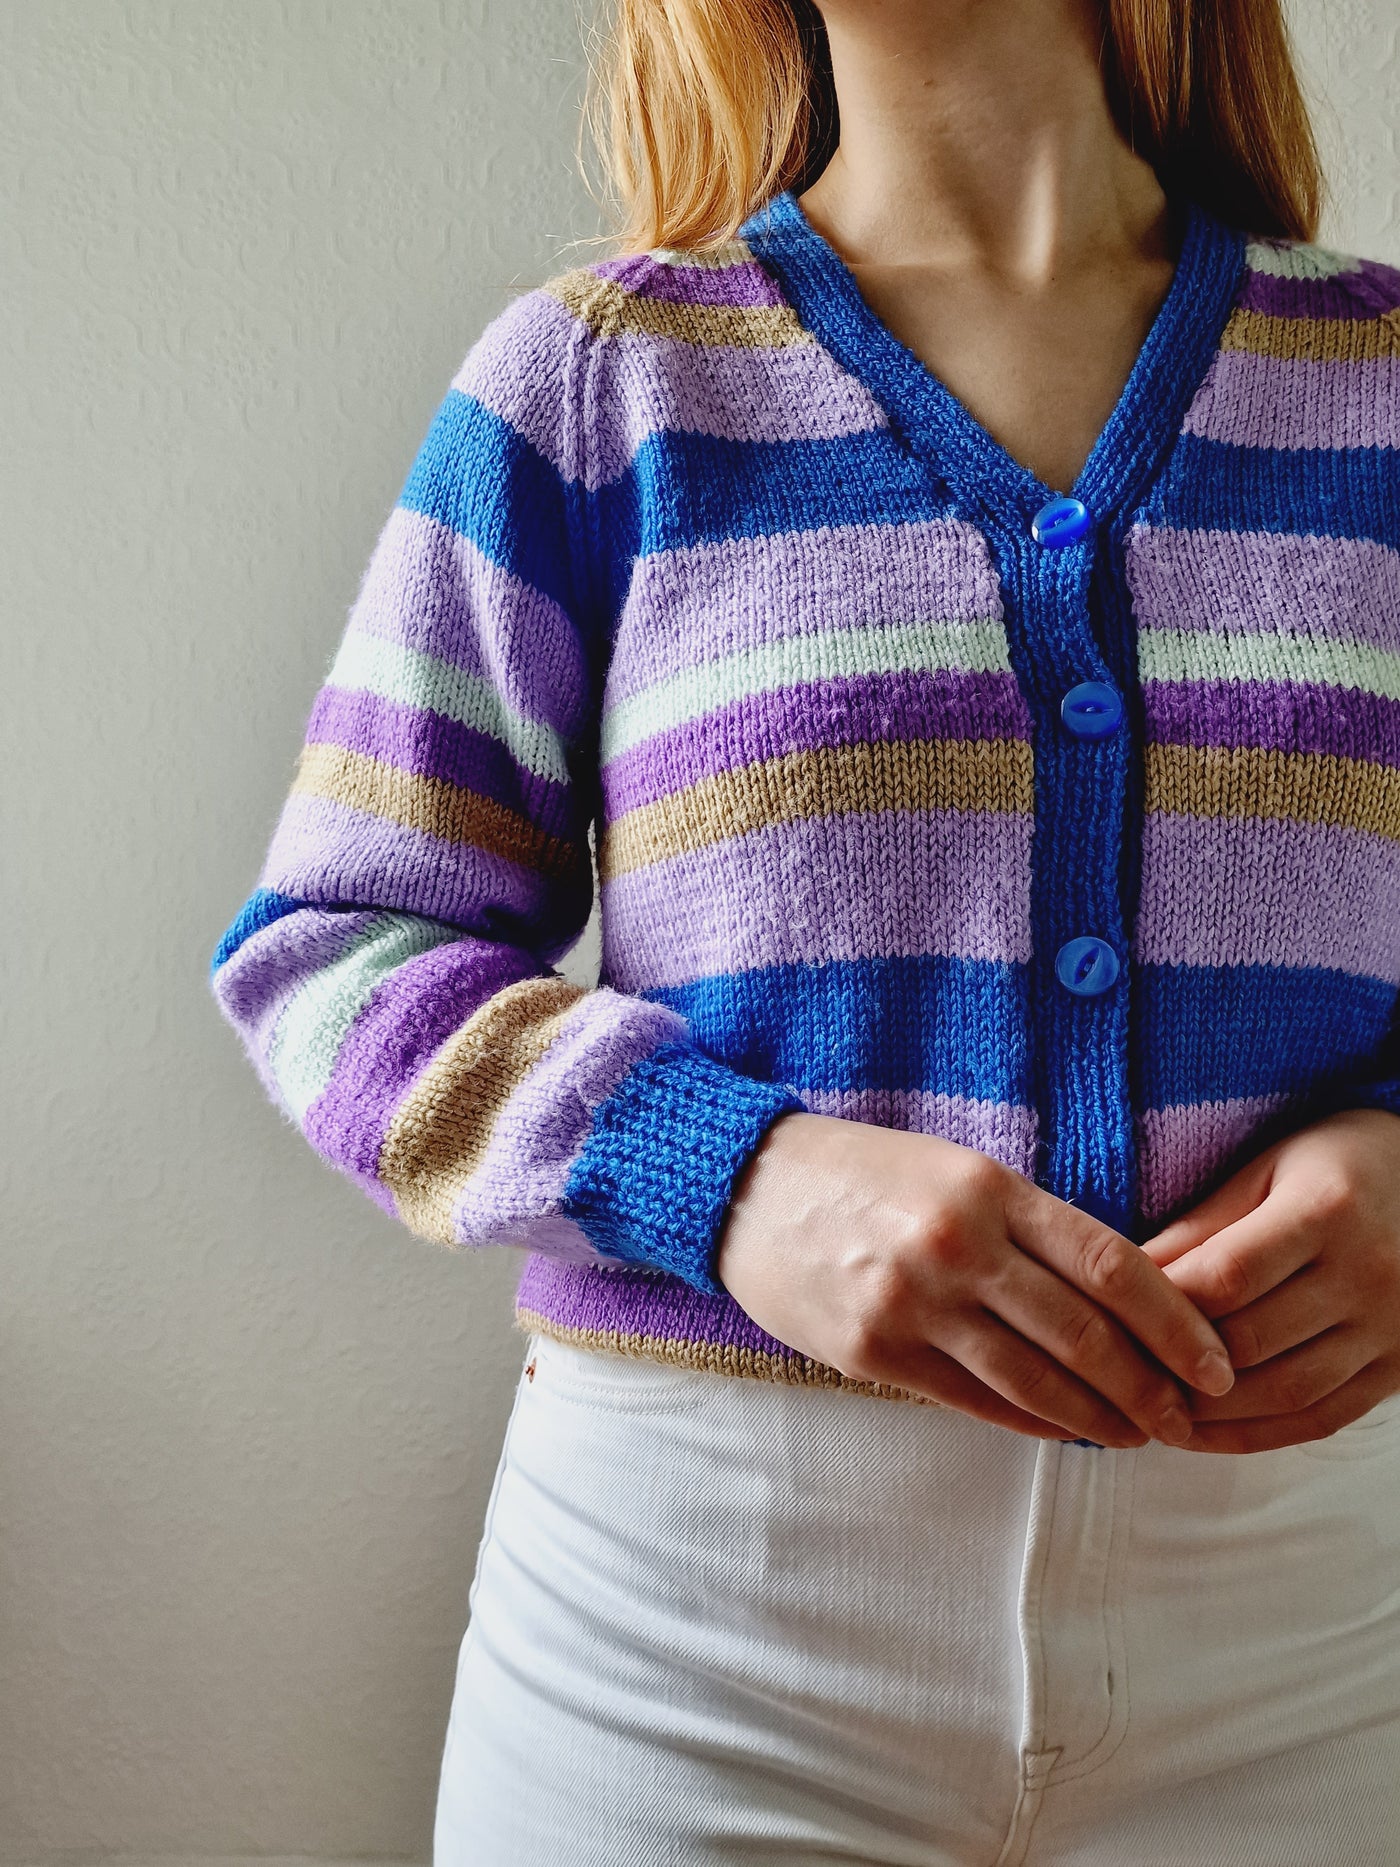 Vintage 80s Handknitted Multicolour Striped V-Neck Cardigan - S/M